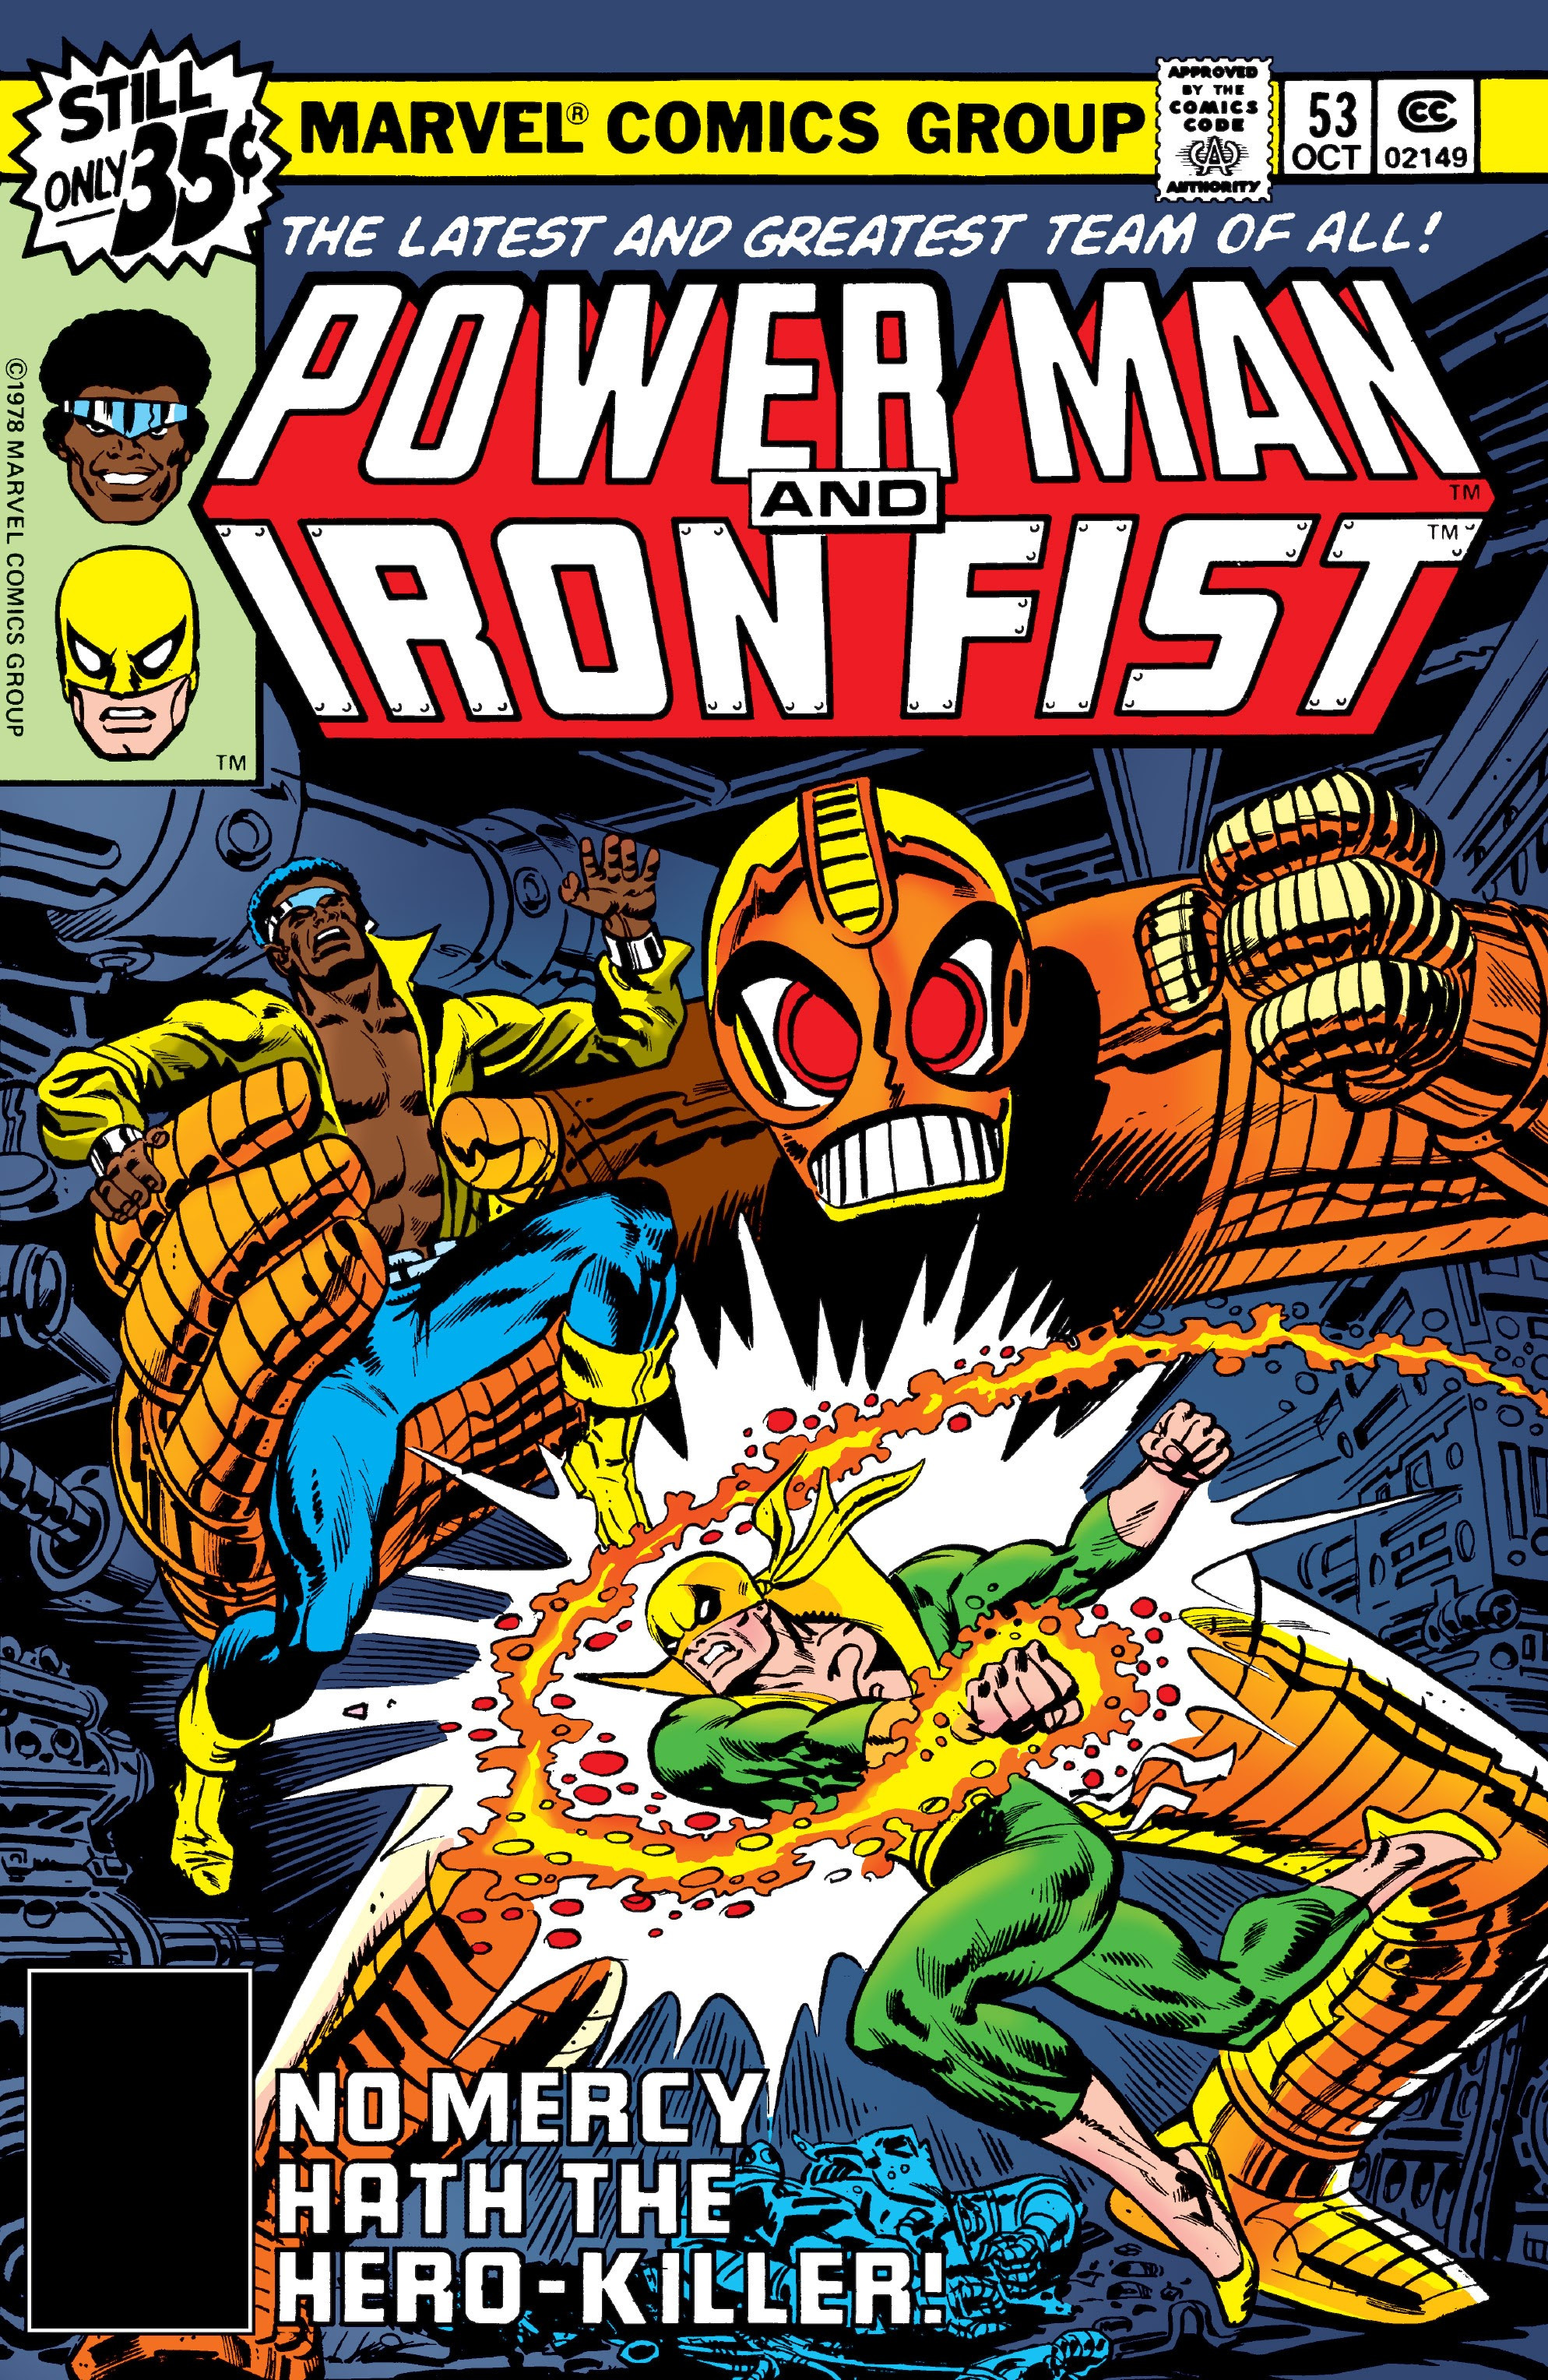 Power Man and Iron Fist Vol 1 53 ...